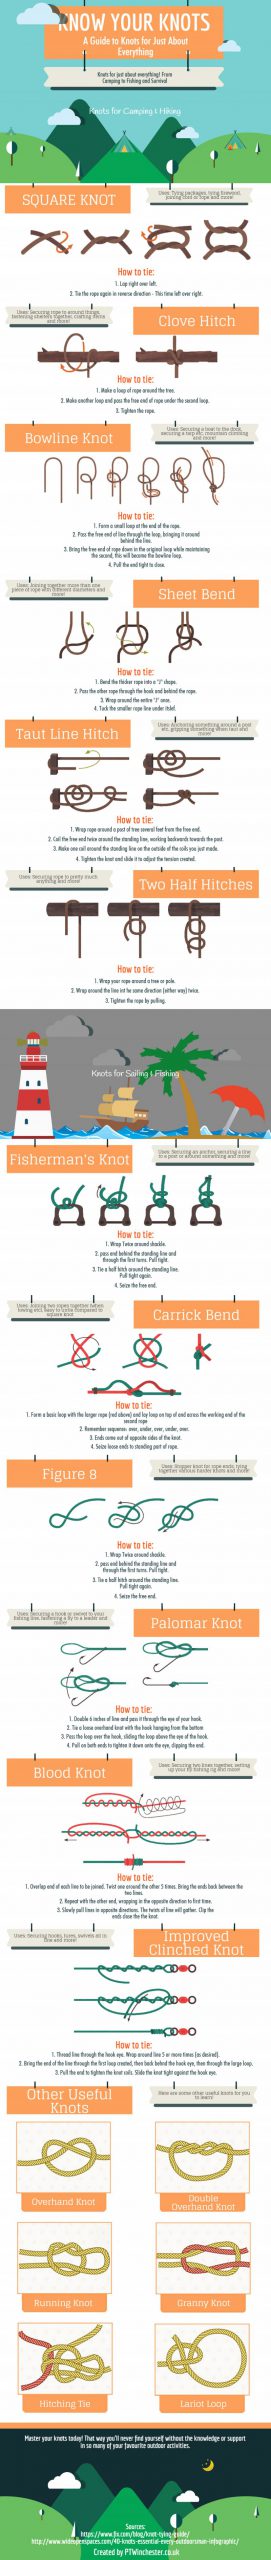 Know Your Knots Infographic